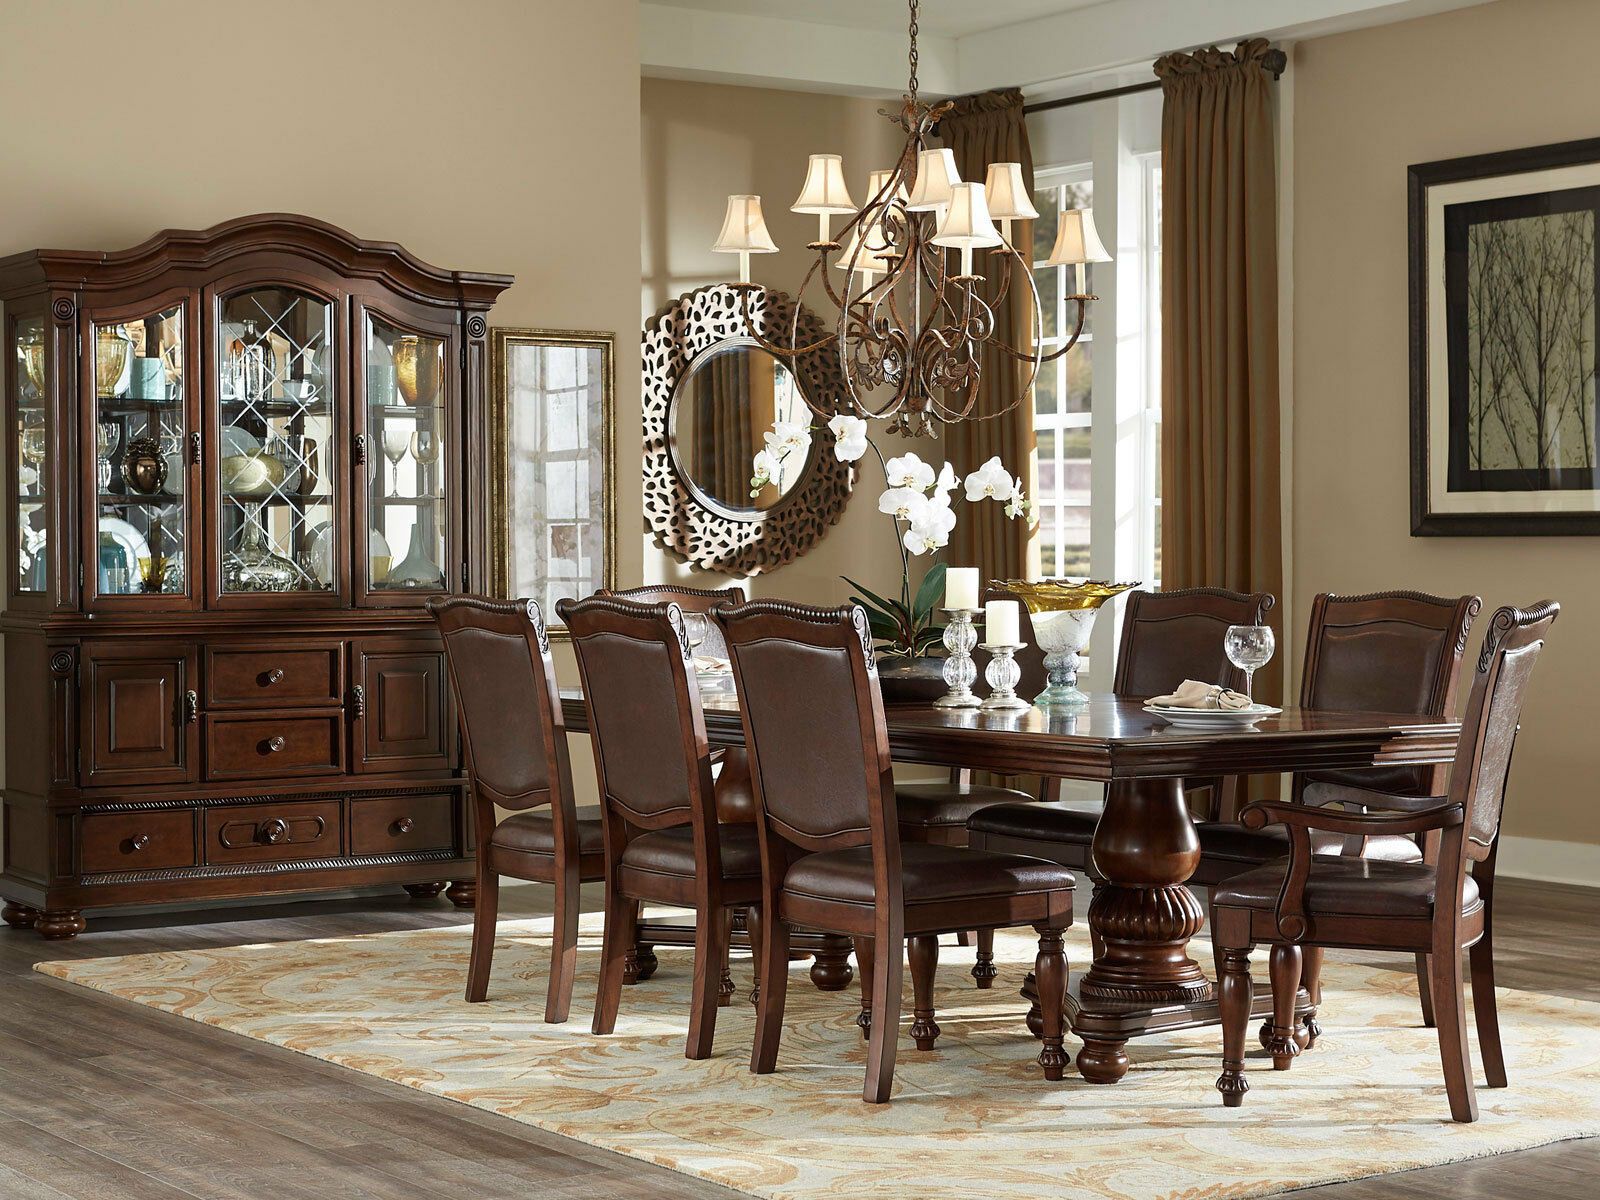 New 9 Piece Traditional Brown Dining Room Rectangular Table And 8 Intended For 9 Piece Square Dining Sets (View 3 of 15)